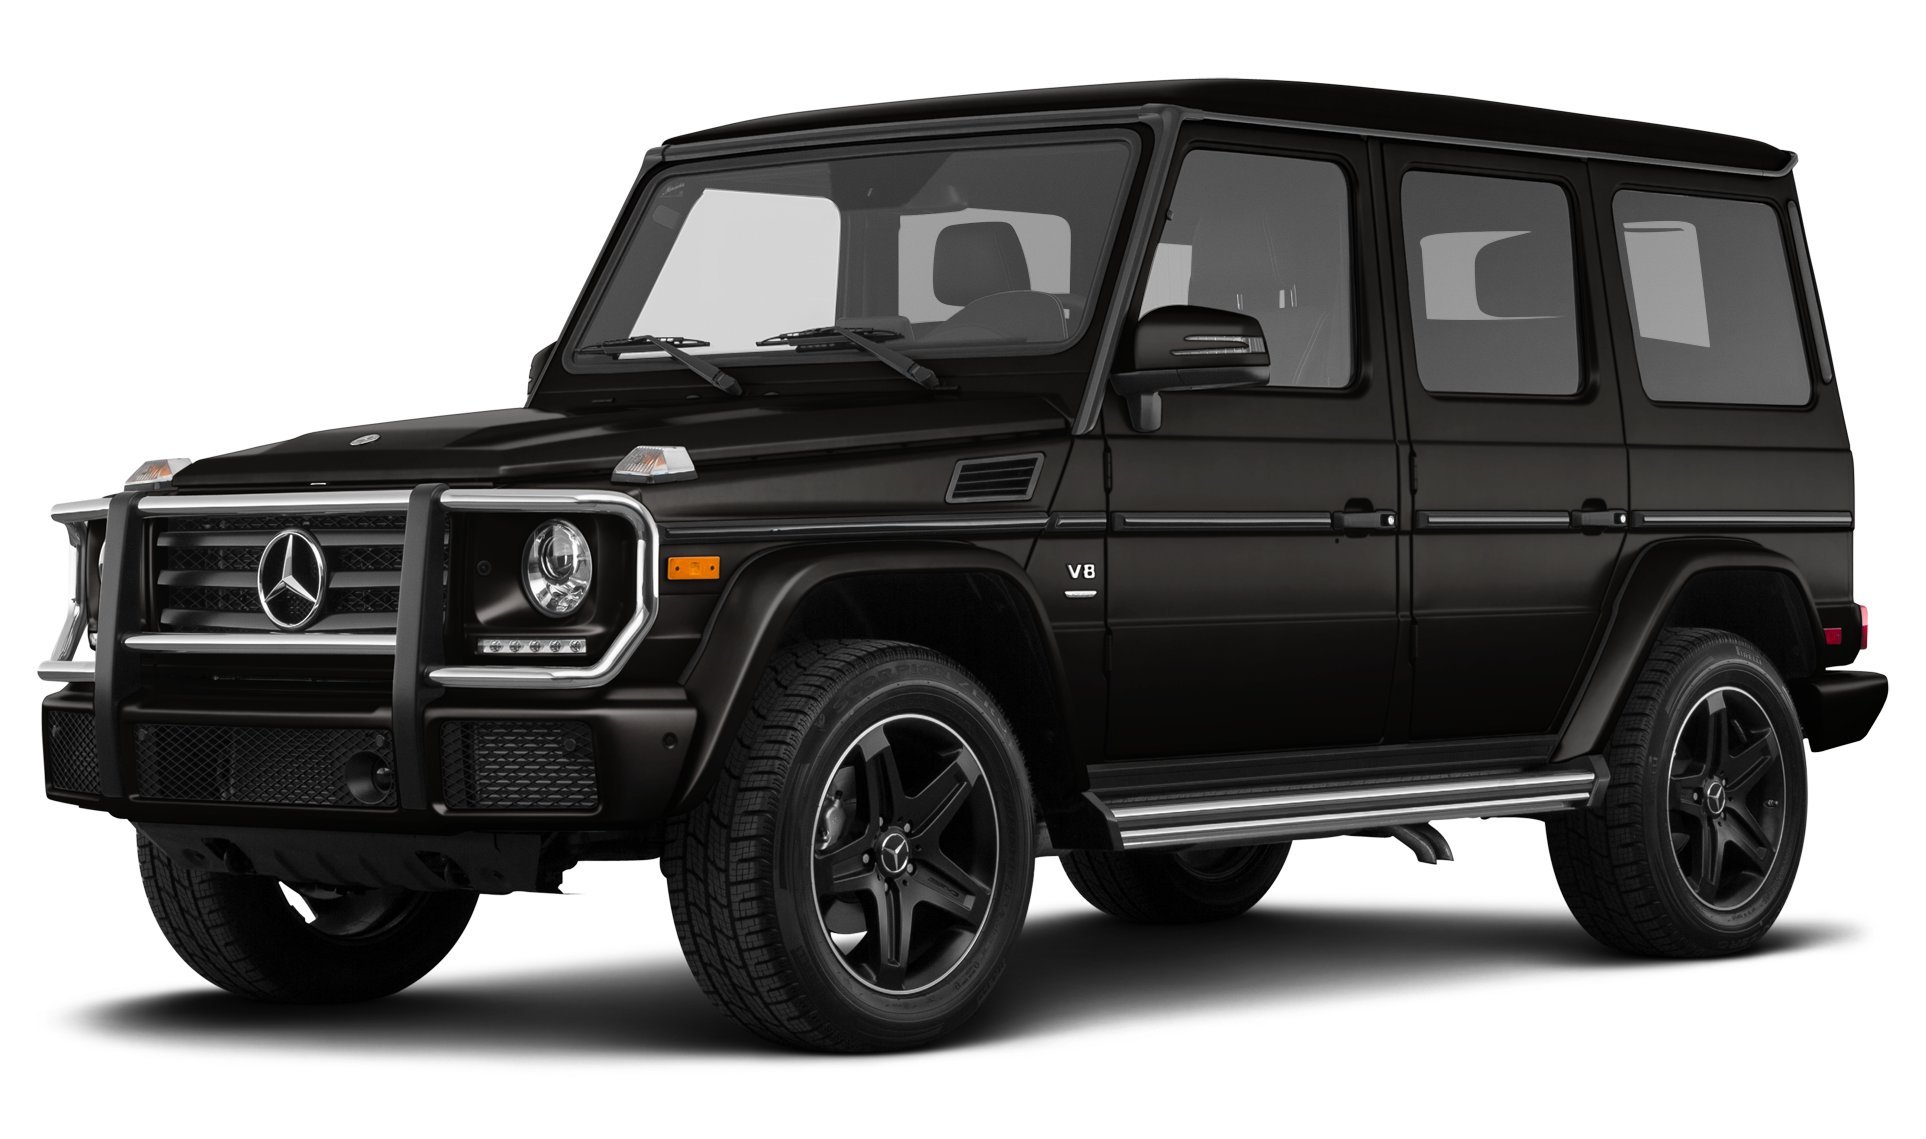  Mercedes-Benz G550-4X4 oem parts and accessories on sale